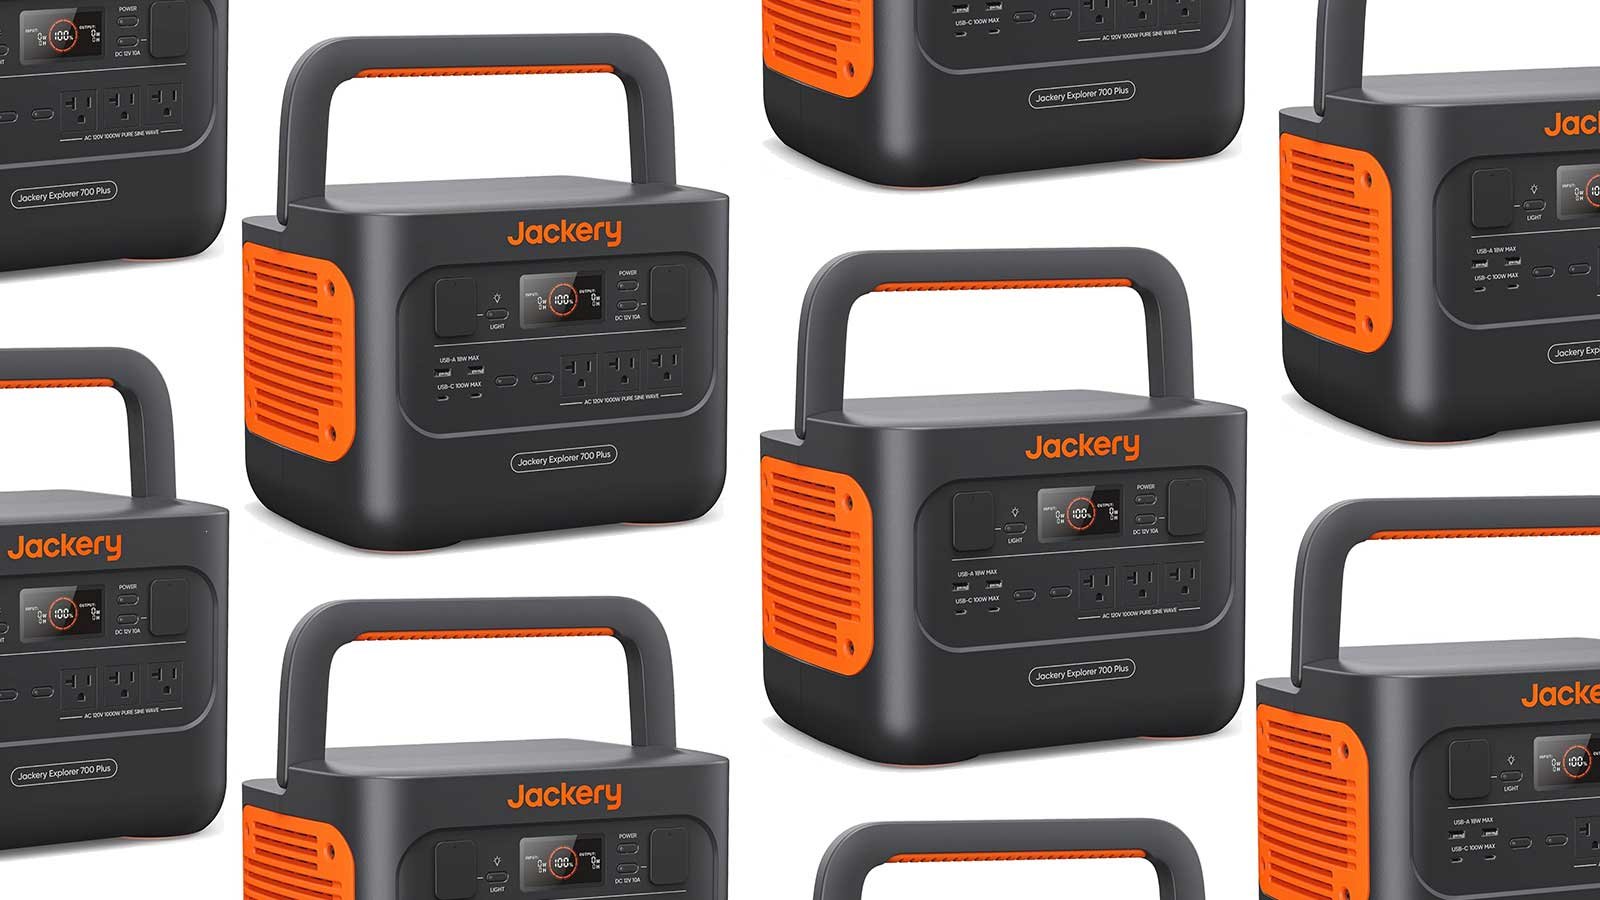 Powerful Cyber Monday deals: Solar generators from Jackery, Anker, and more up to 50% off